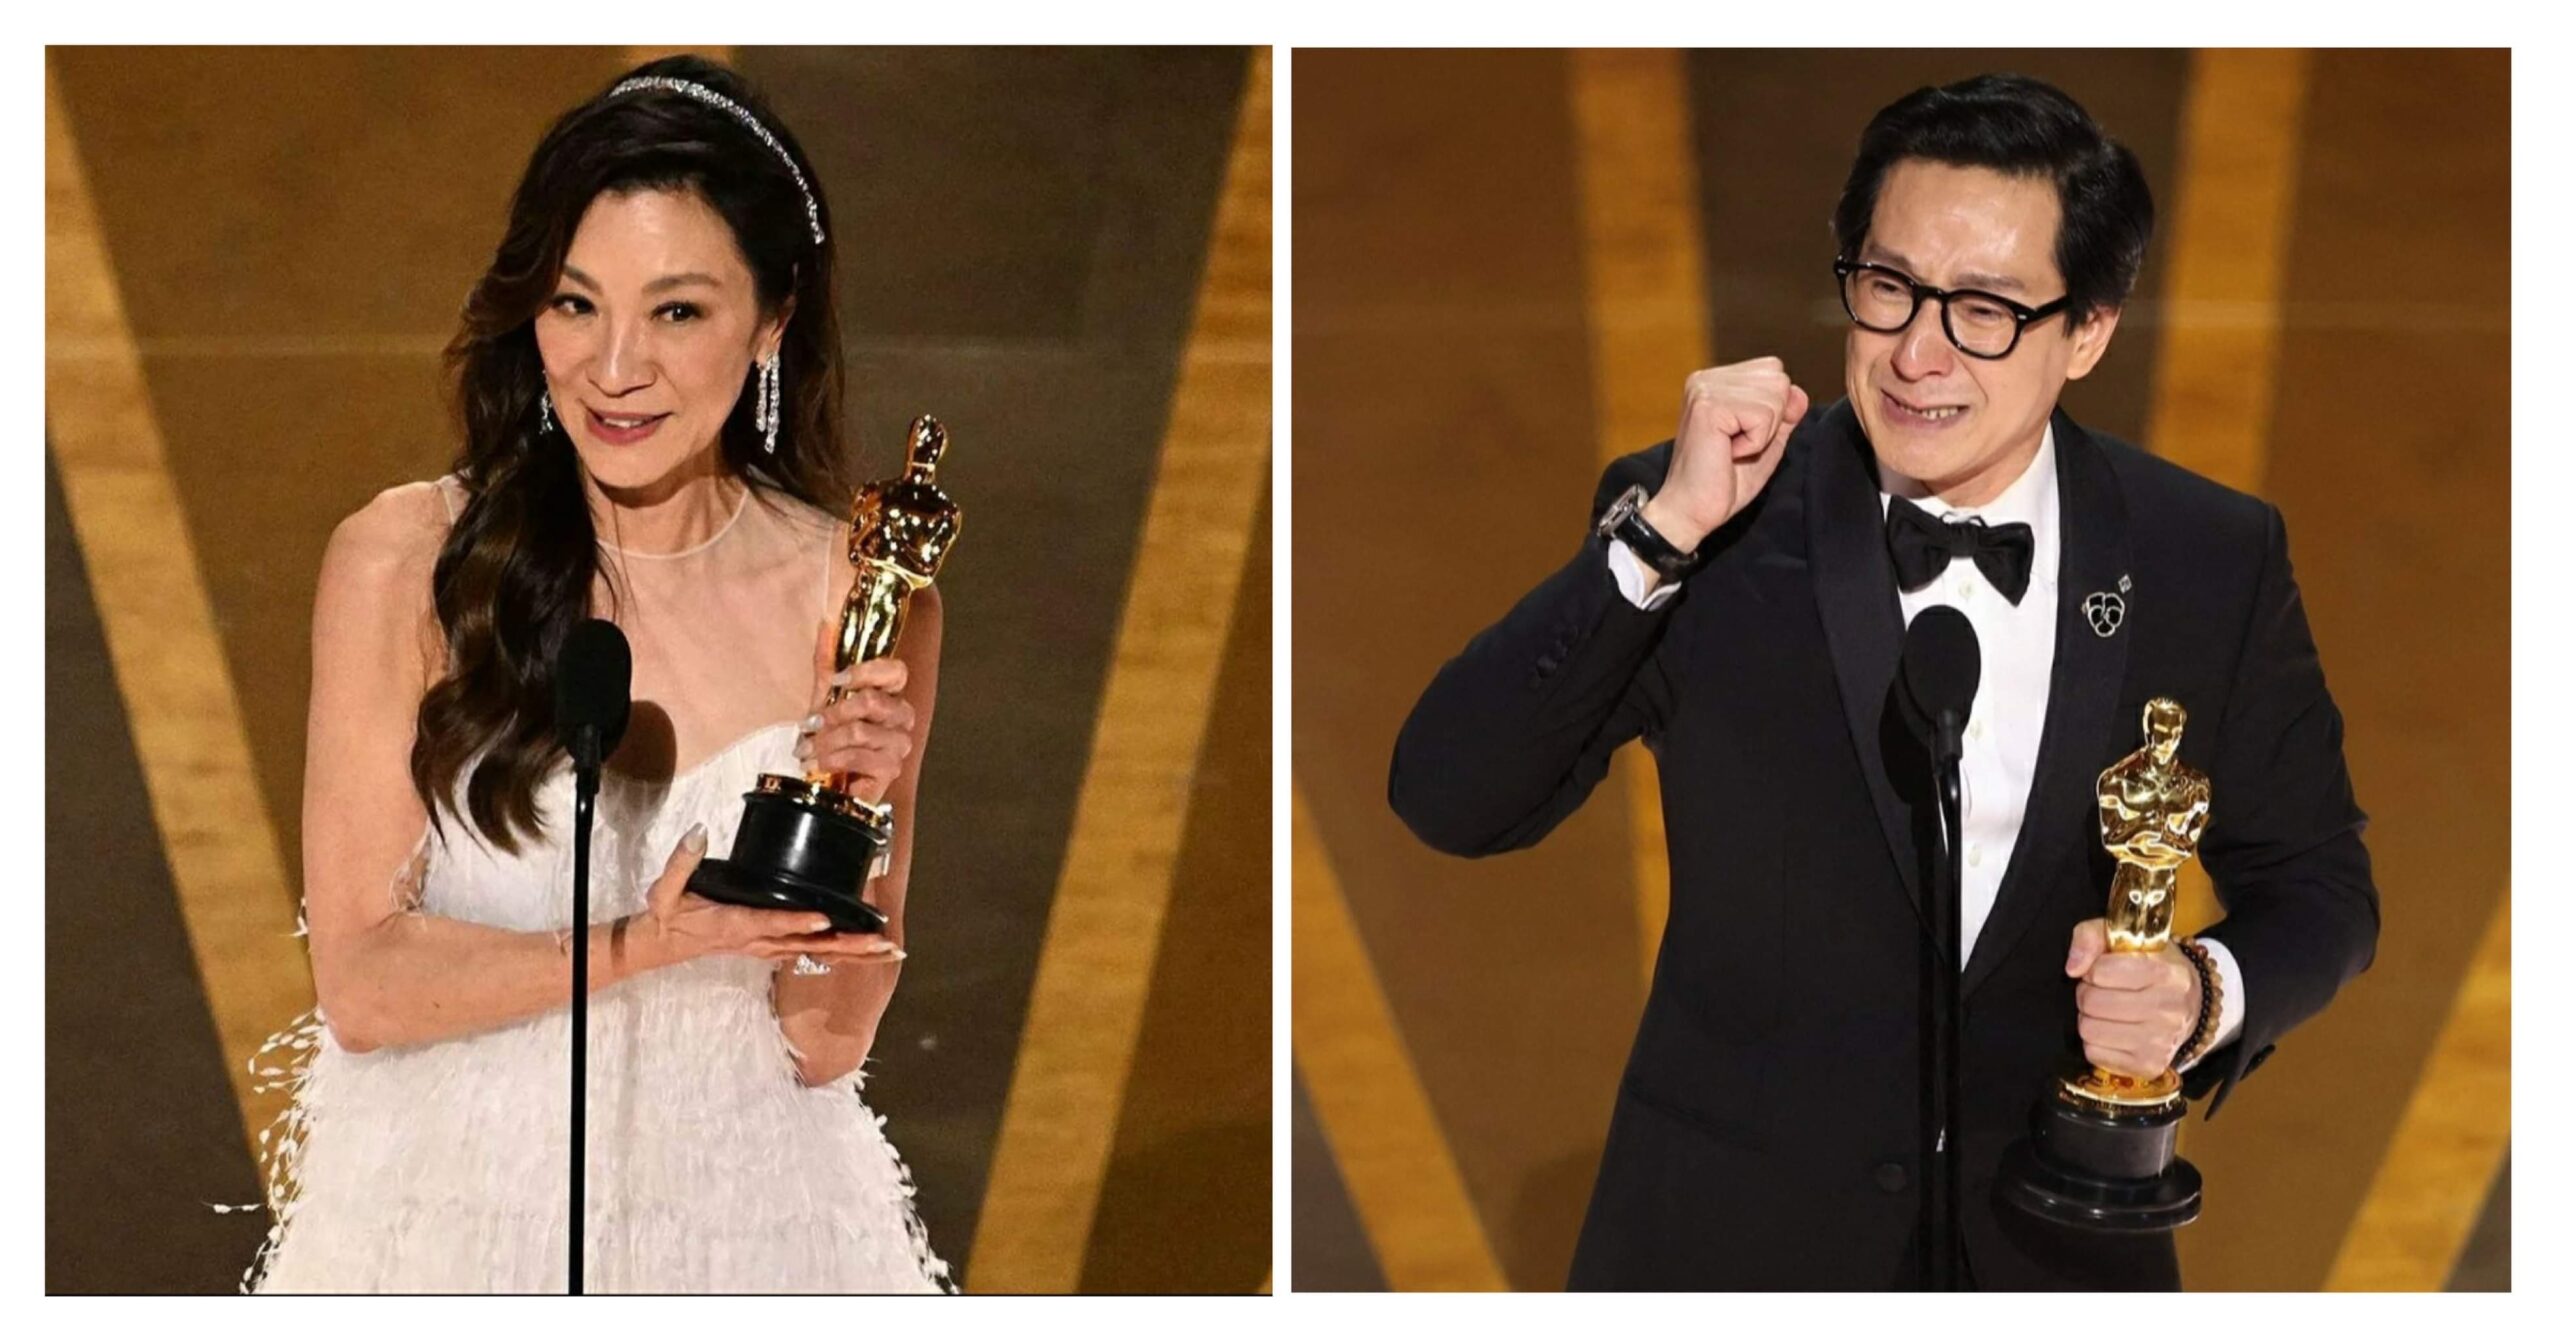 Asian actors win big at Oscars as Yeoh and Quan earn top acting honors